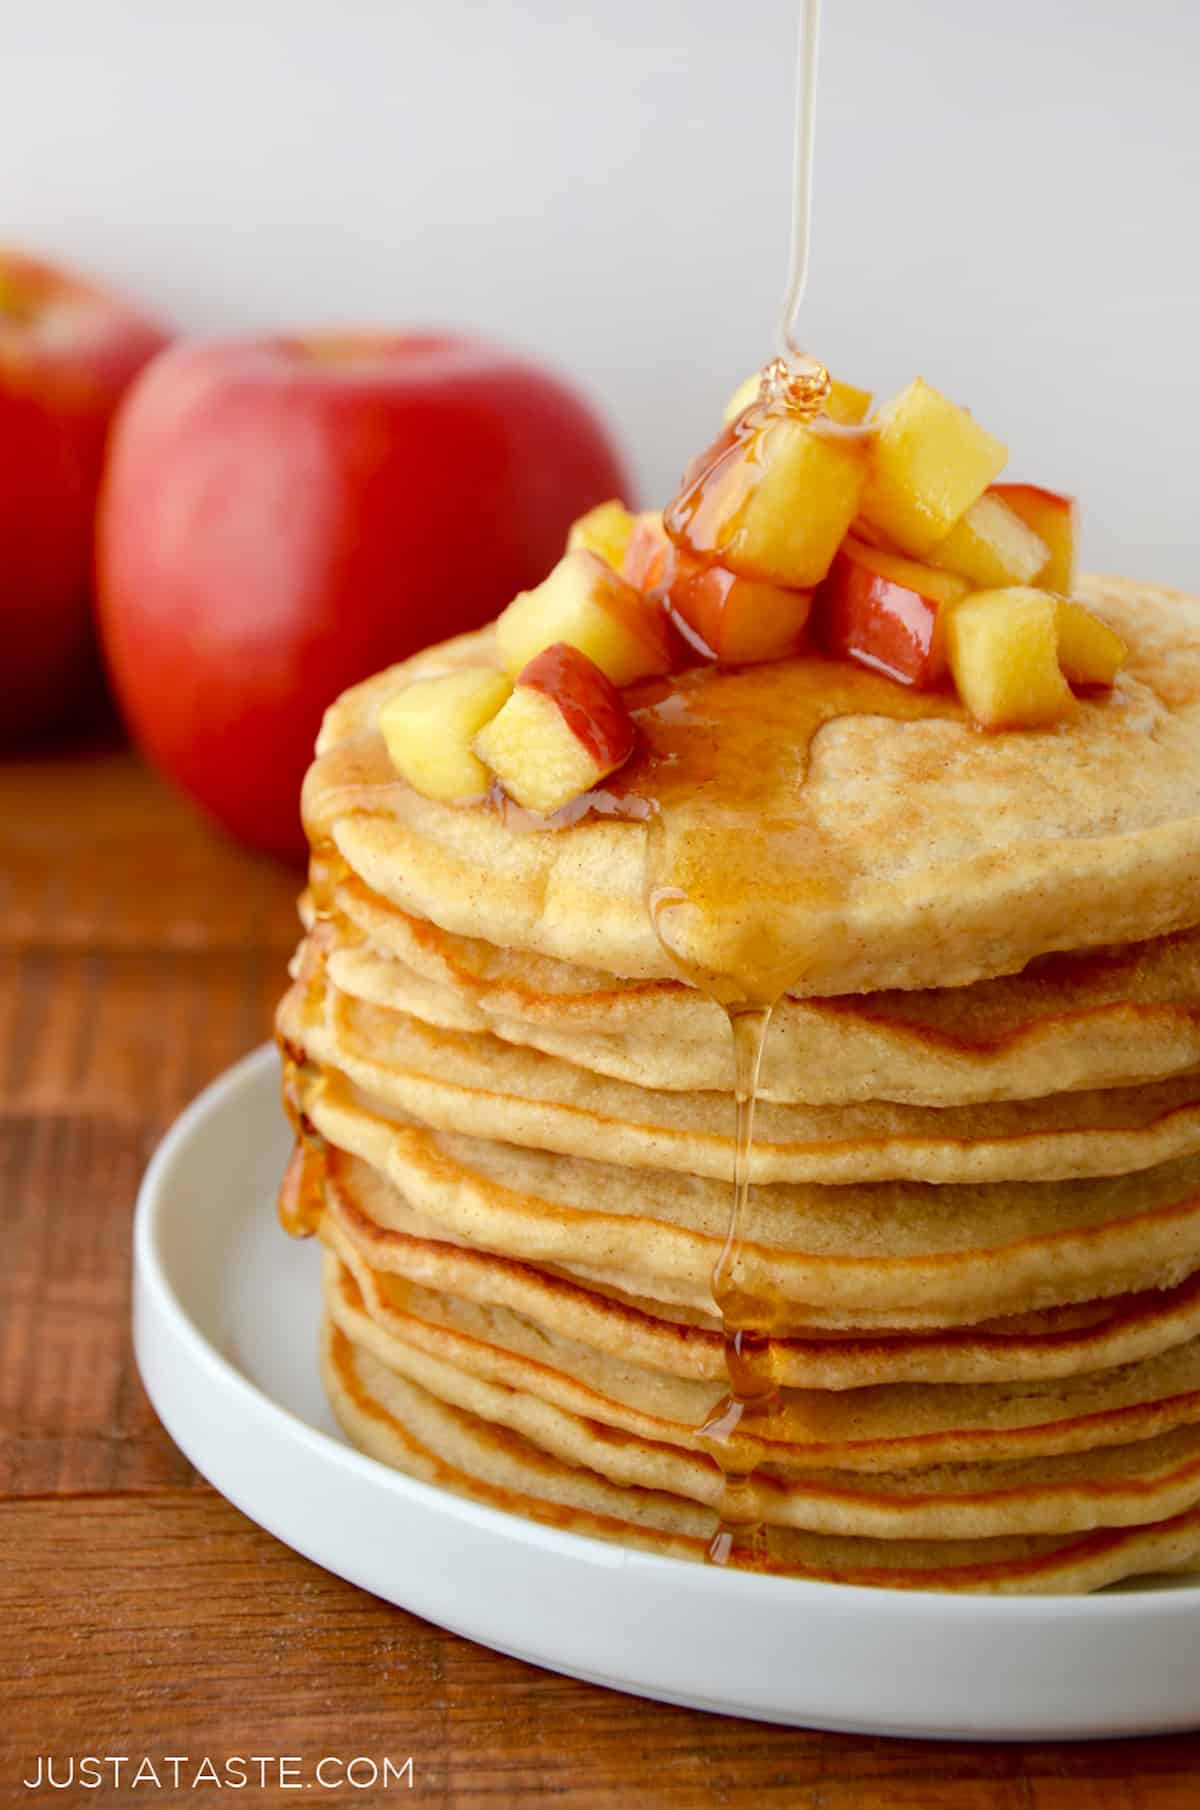 A stack of pancakes with sautéed apples on top and maple syrup being drizzled onto the pancakes.